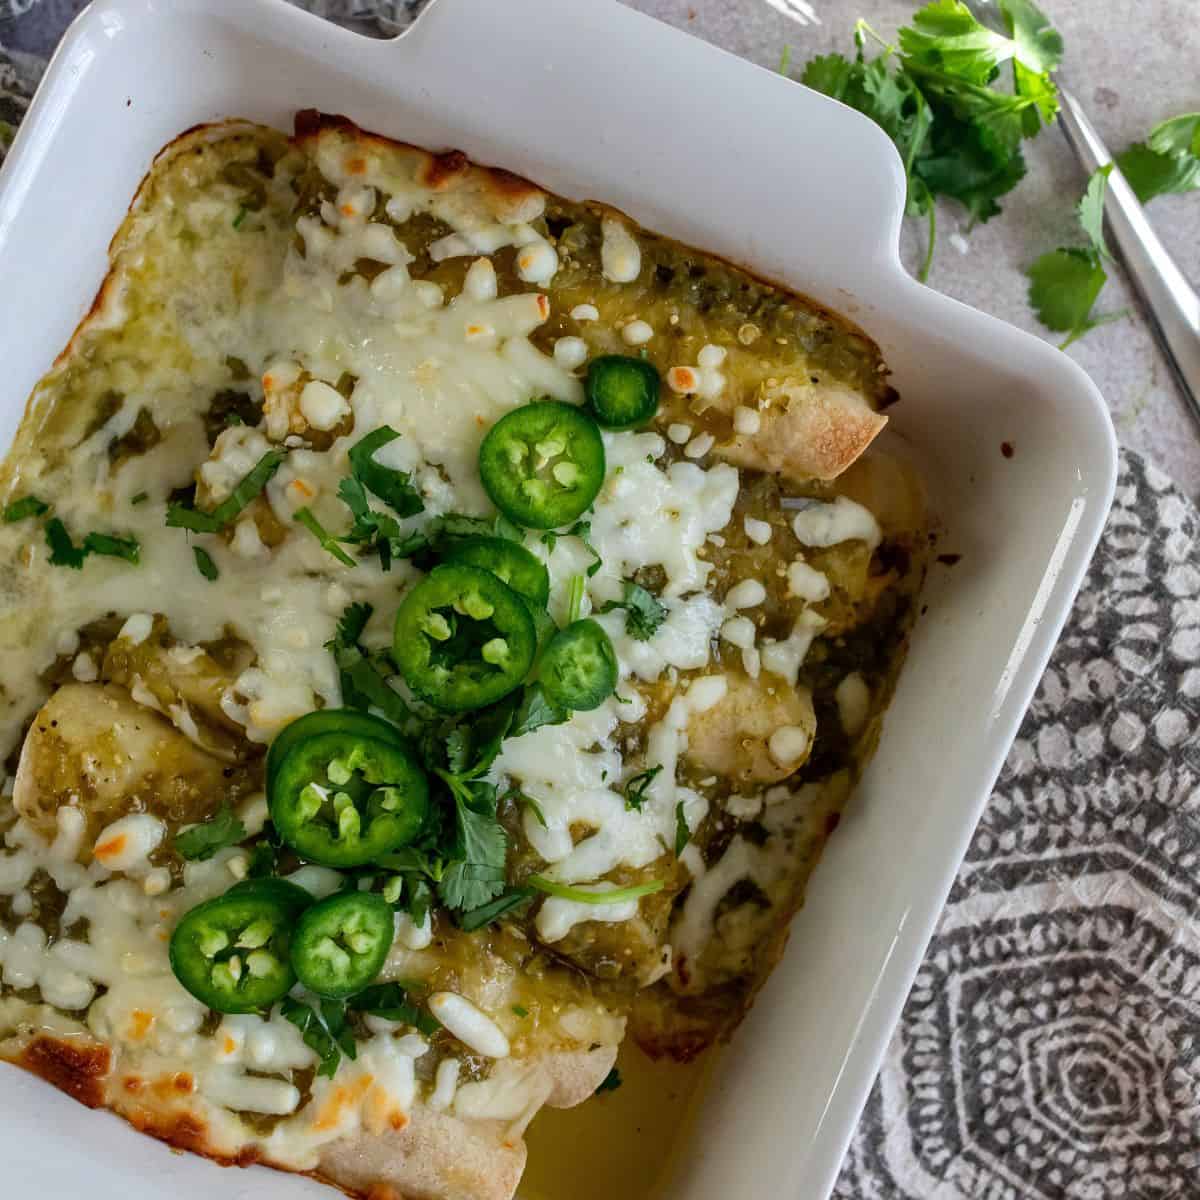 Green Chili Chicken Enchiladas made with nutritious ingredients in a baking dish.